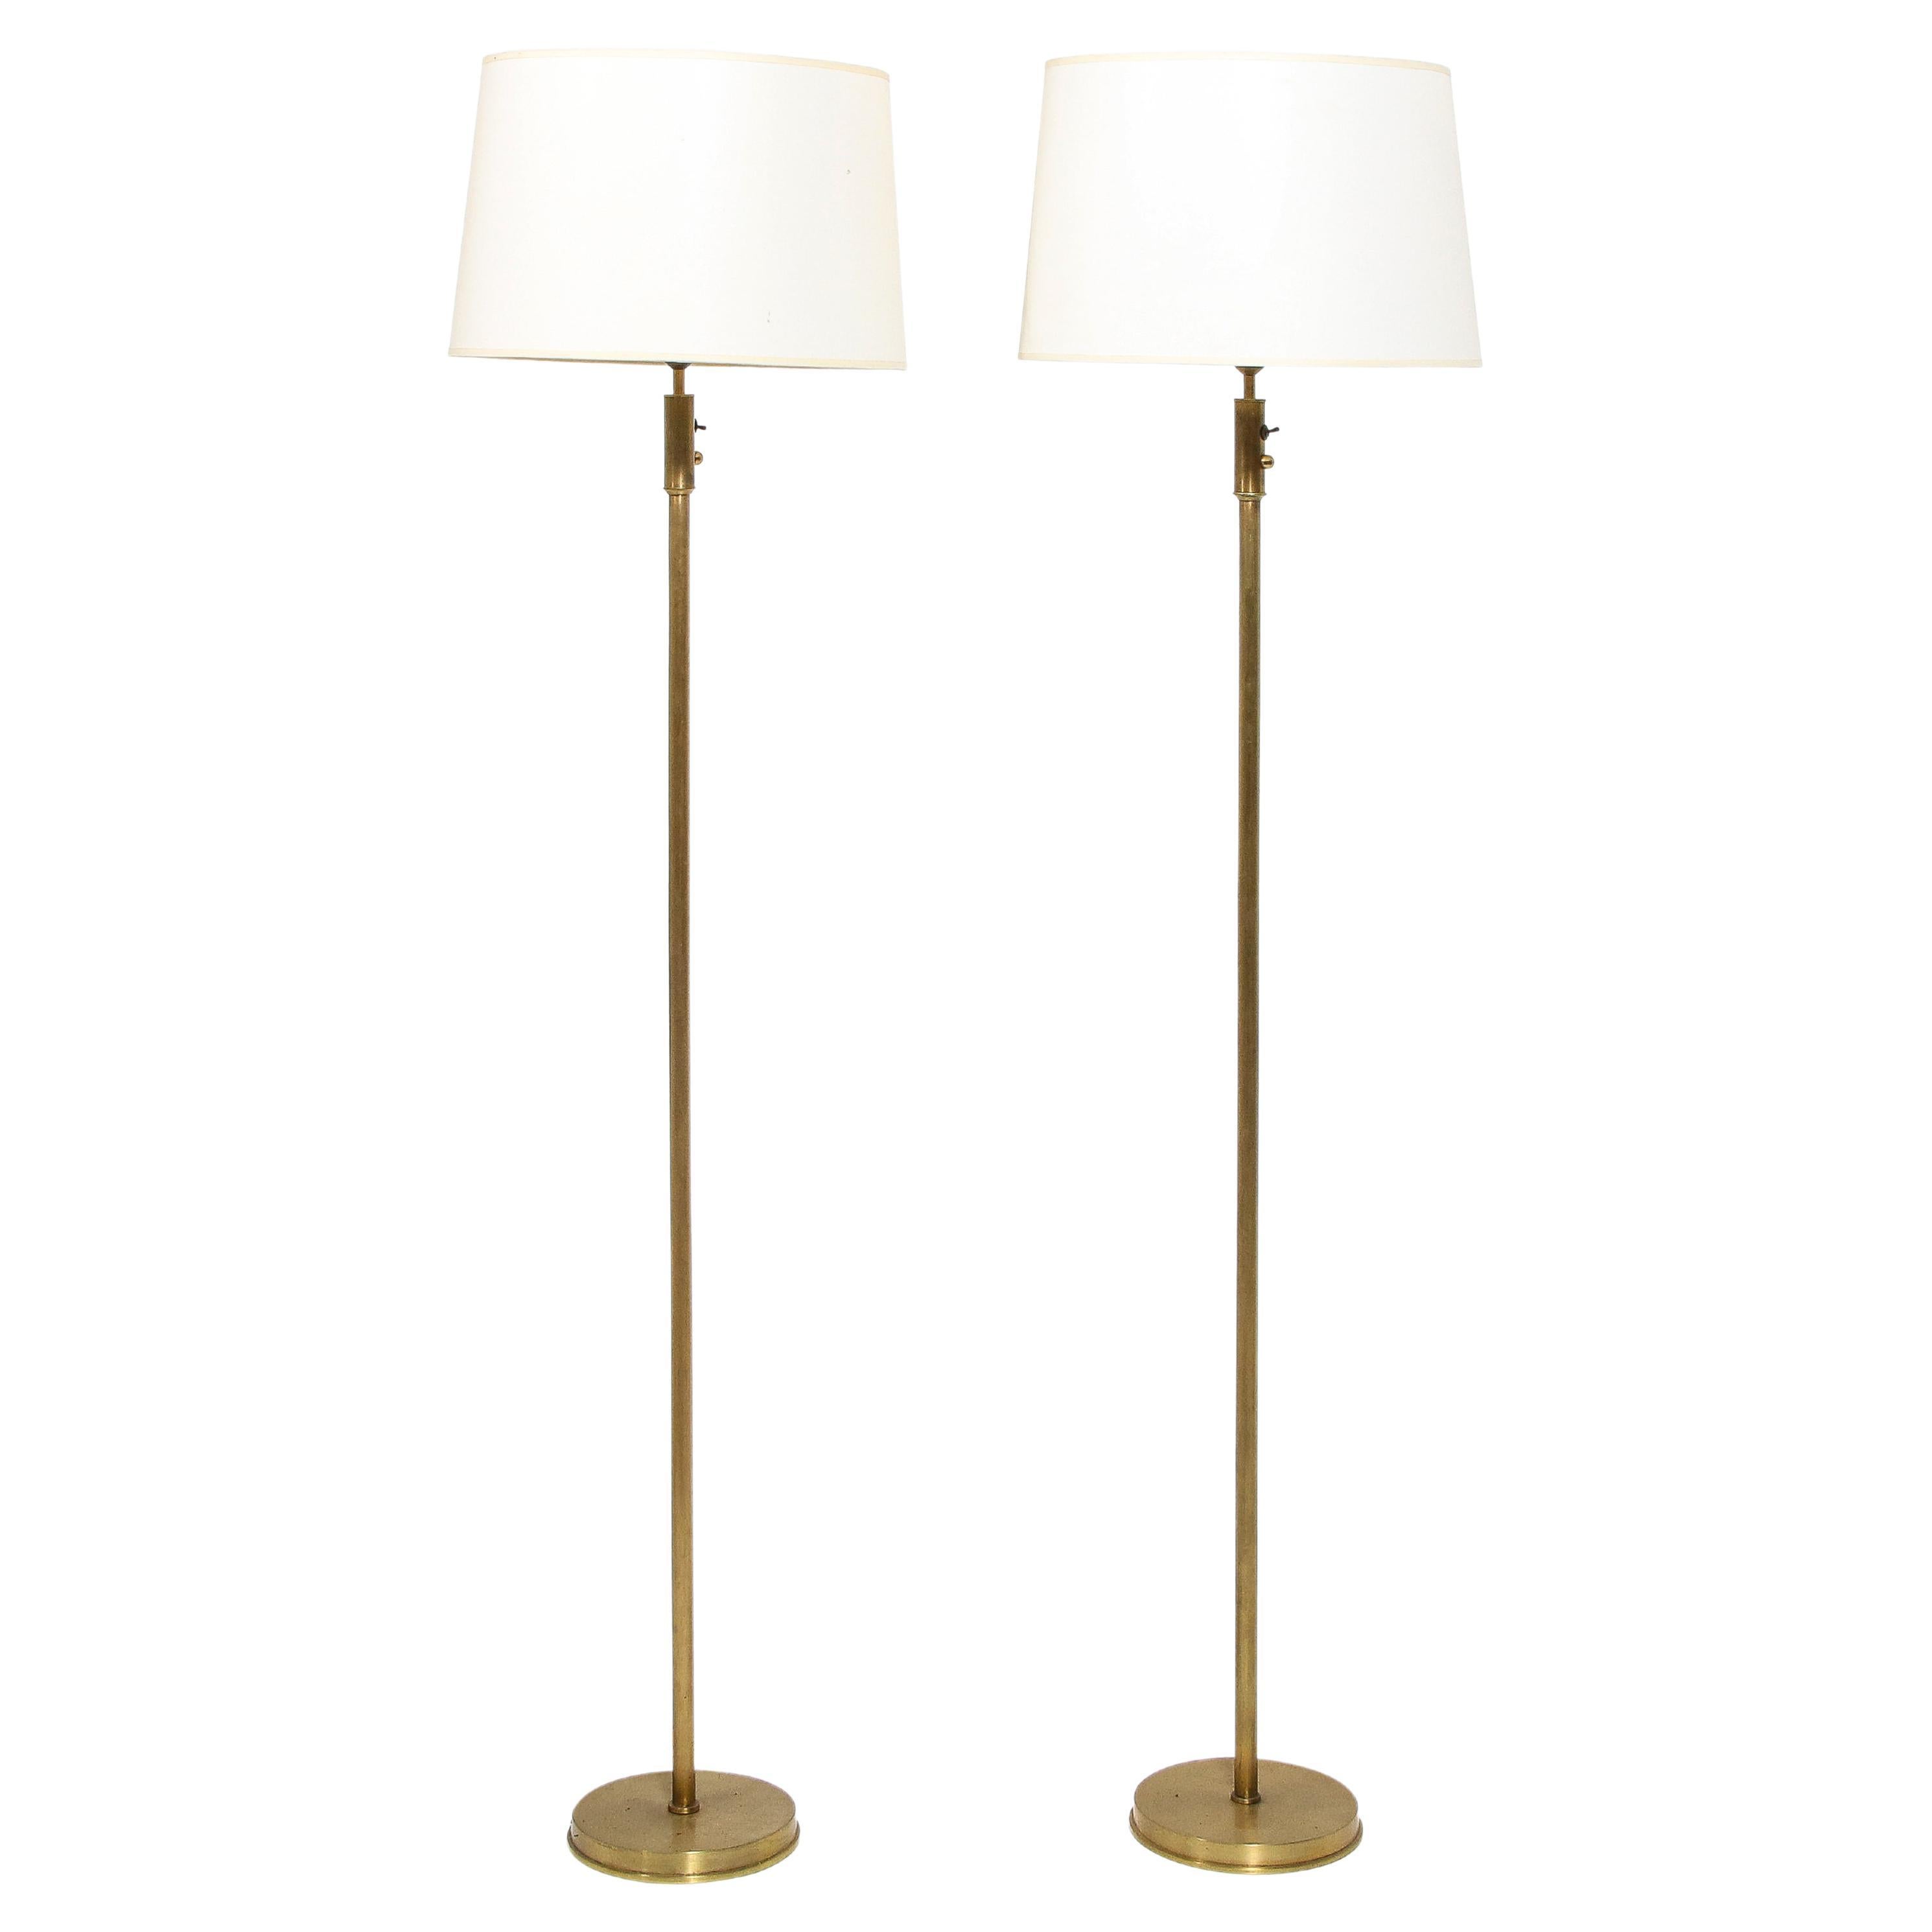 Pair of Brushed Brass Floor Lamps, France 1960's